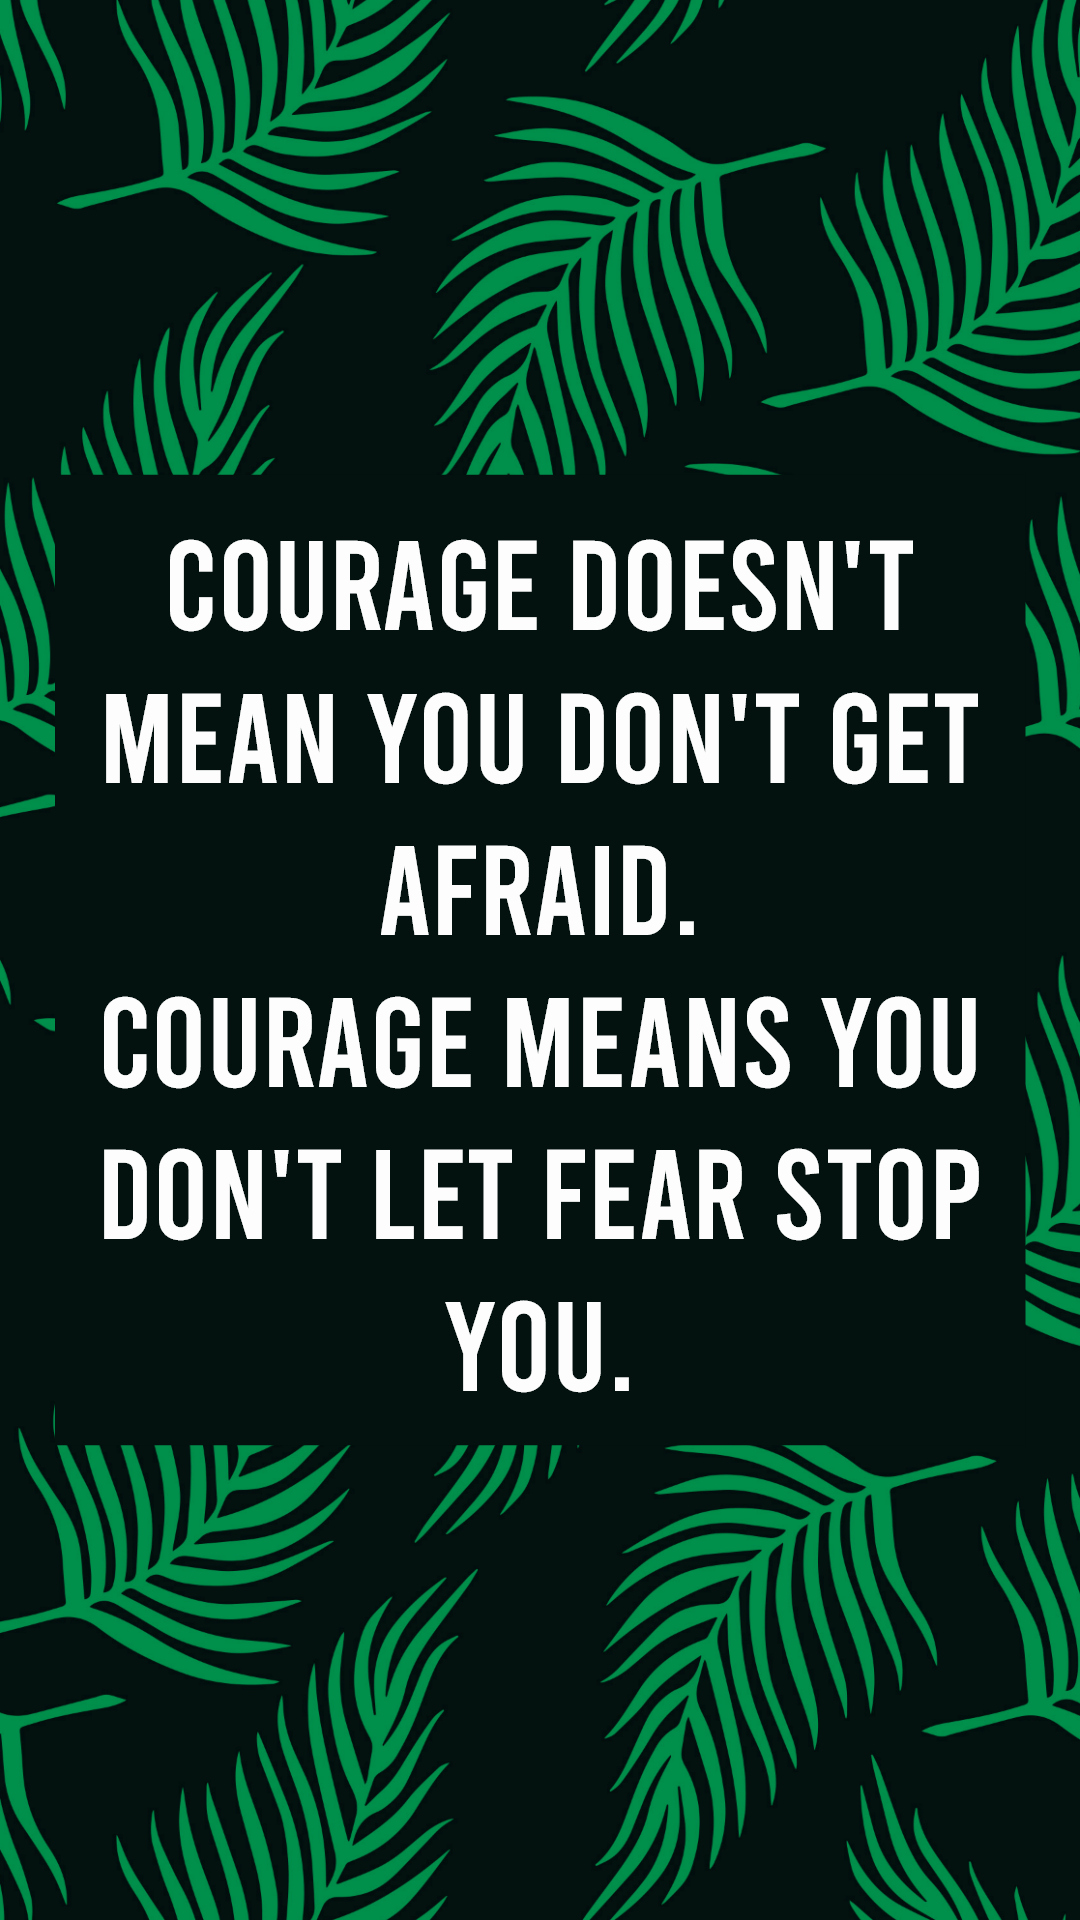 Phone Wallpaper, Phone Background, Quotes To Live By, - Courage Wallpaper Hd Iphone , HD Wallpaper & Backgrounds